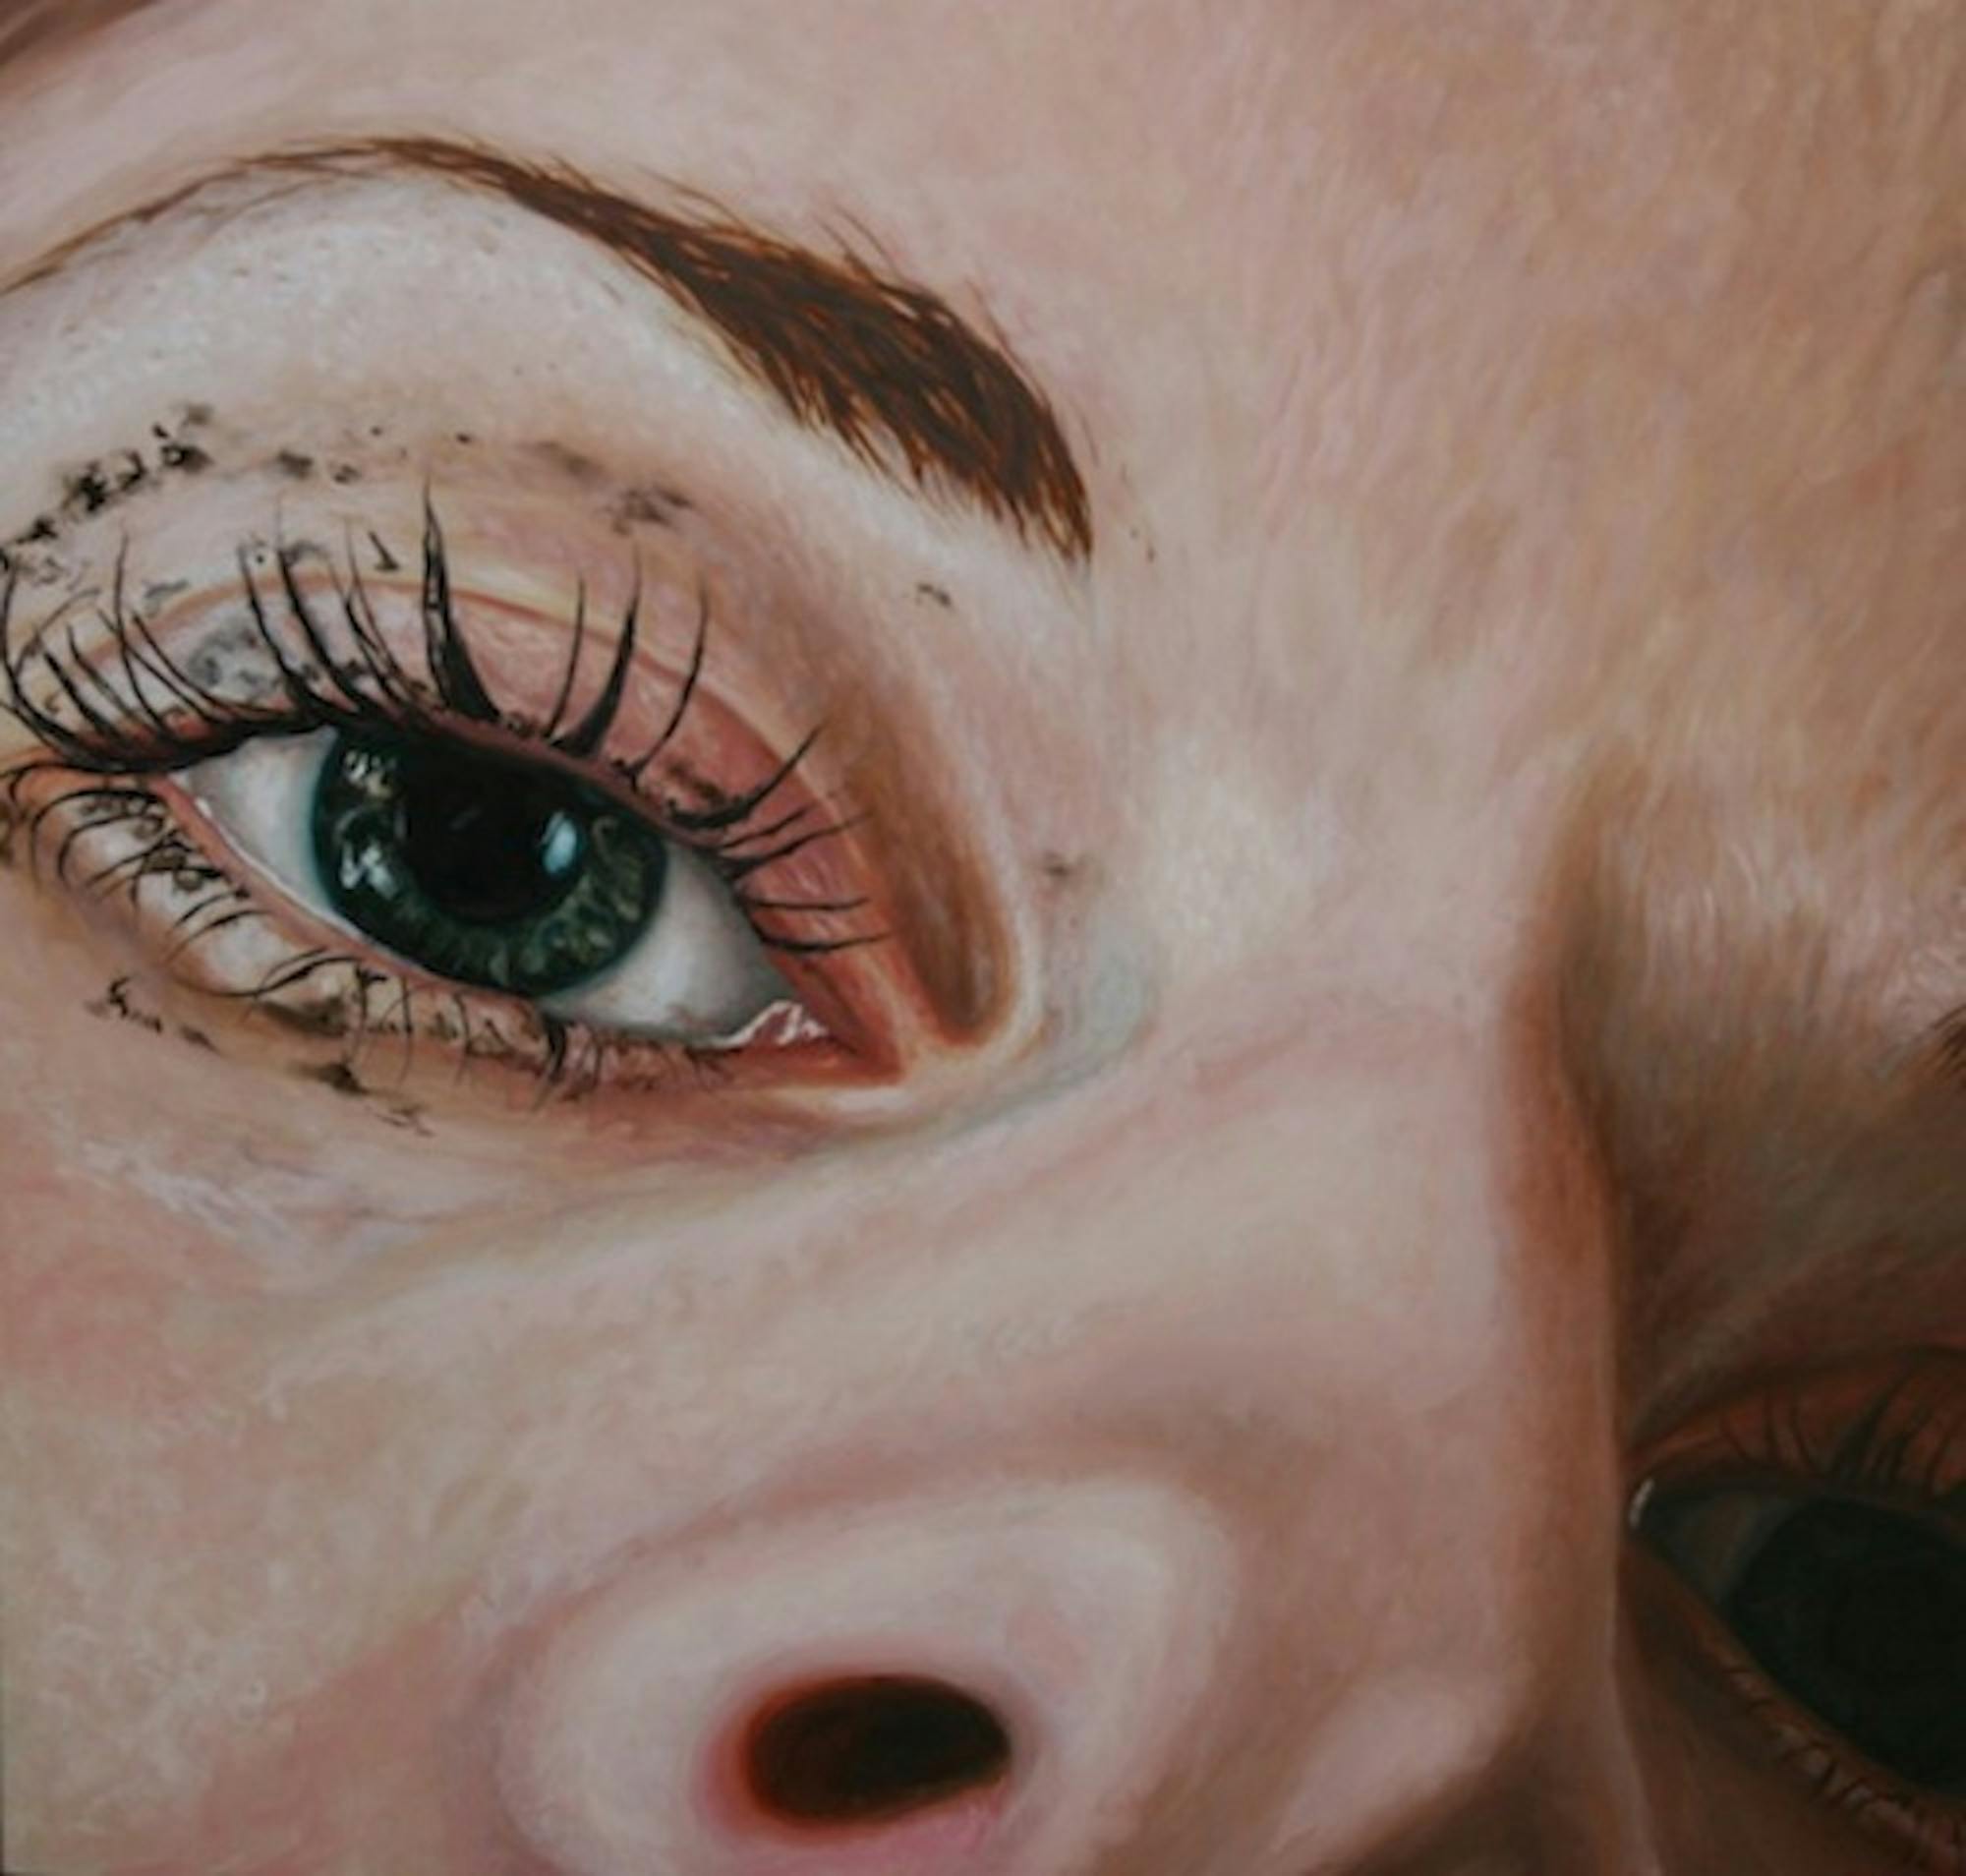 	Alison Oakes, a 28-year-old artist, used oil paint on porcelean instead of canvas for her piece “Blink.”